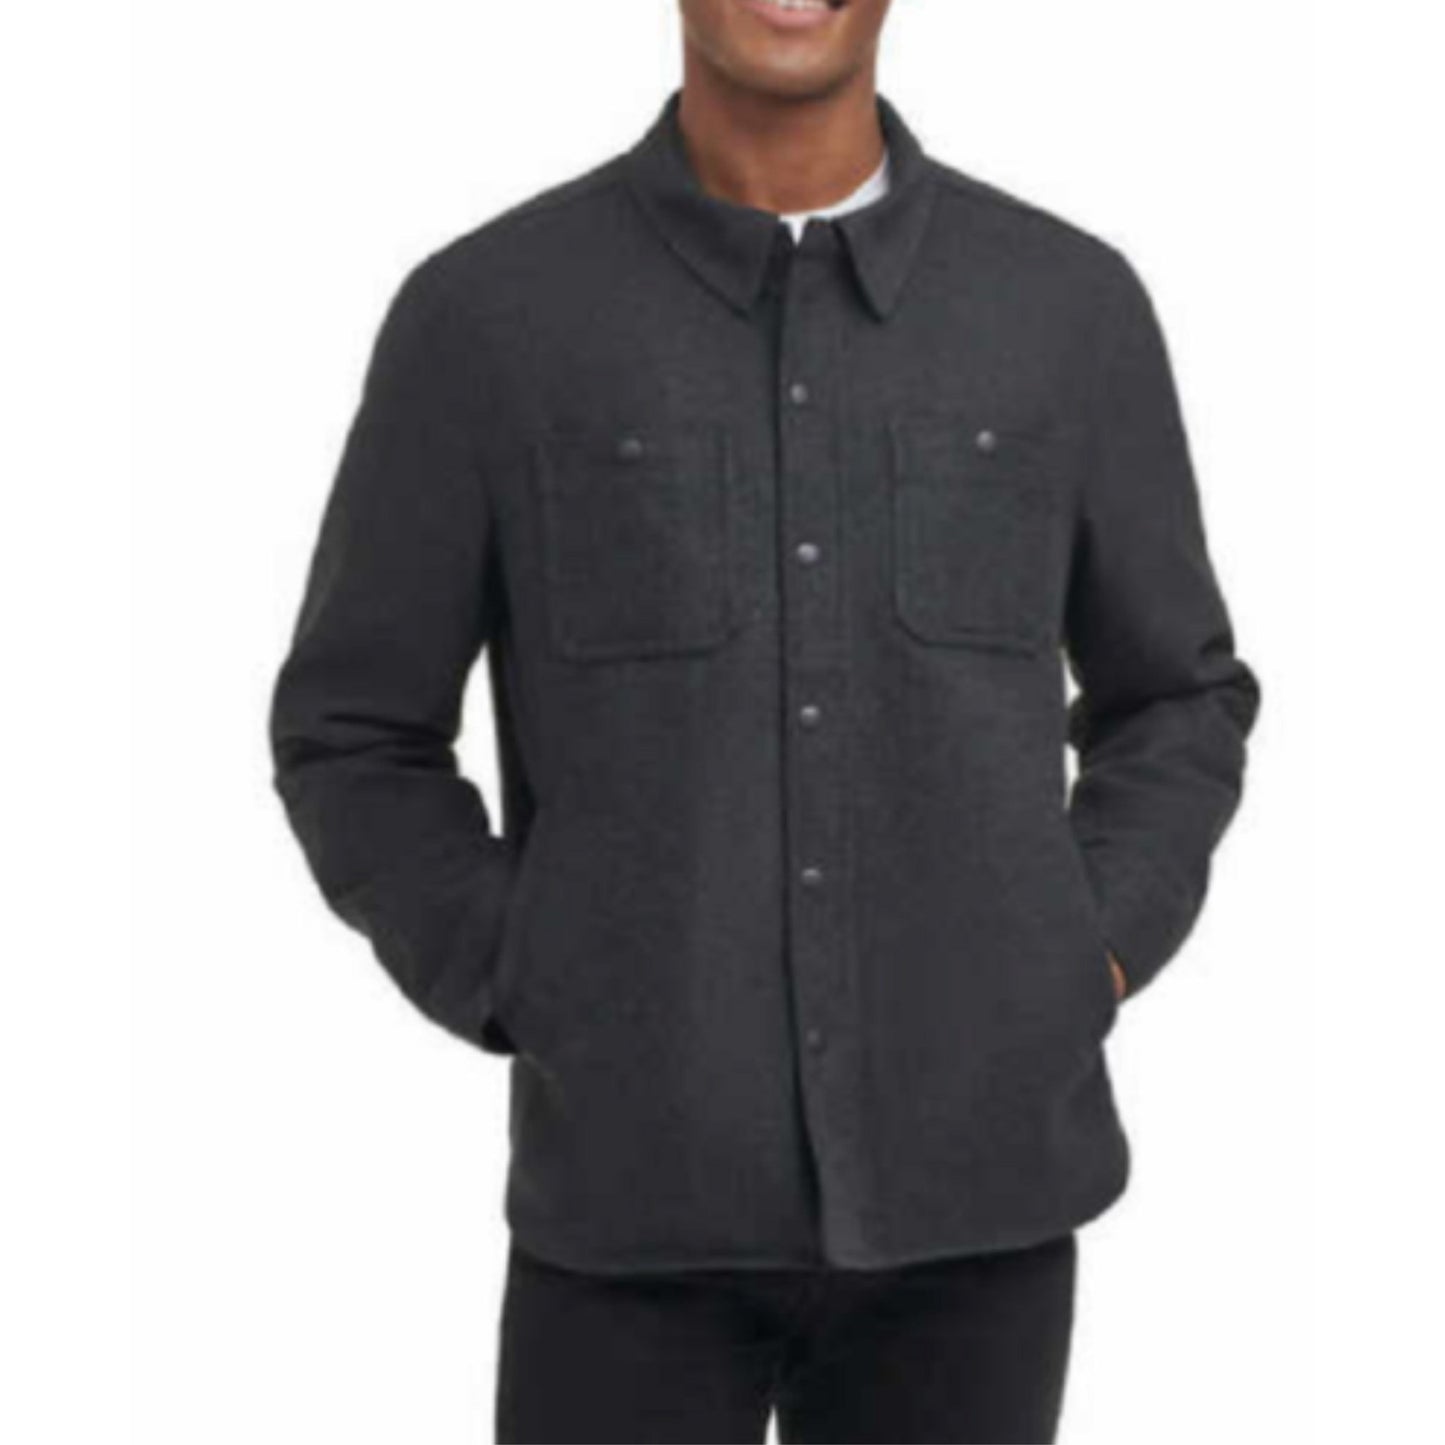 GH Bass & Co Men's Wool Blended Lined Jacket, Charcoal